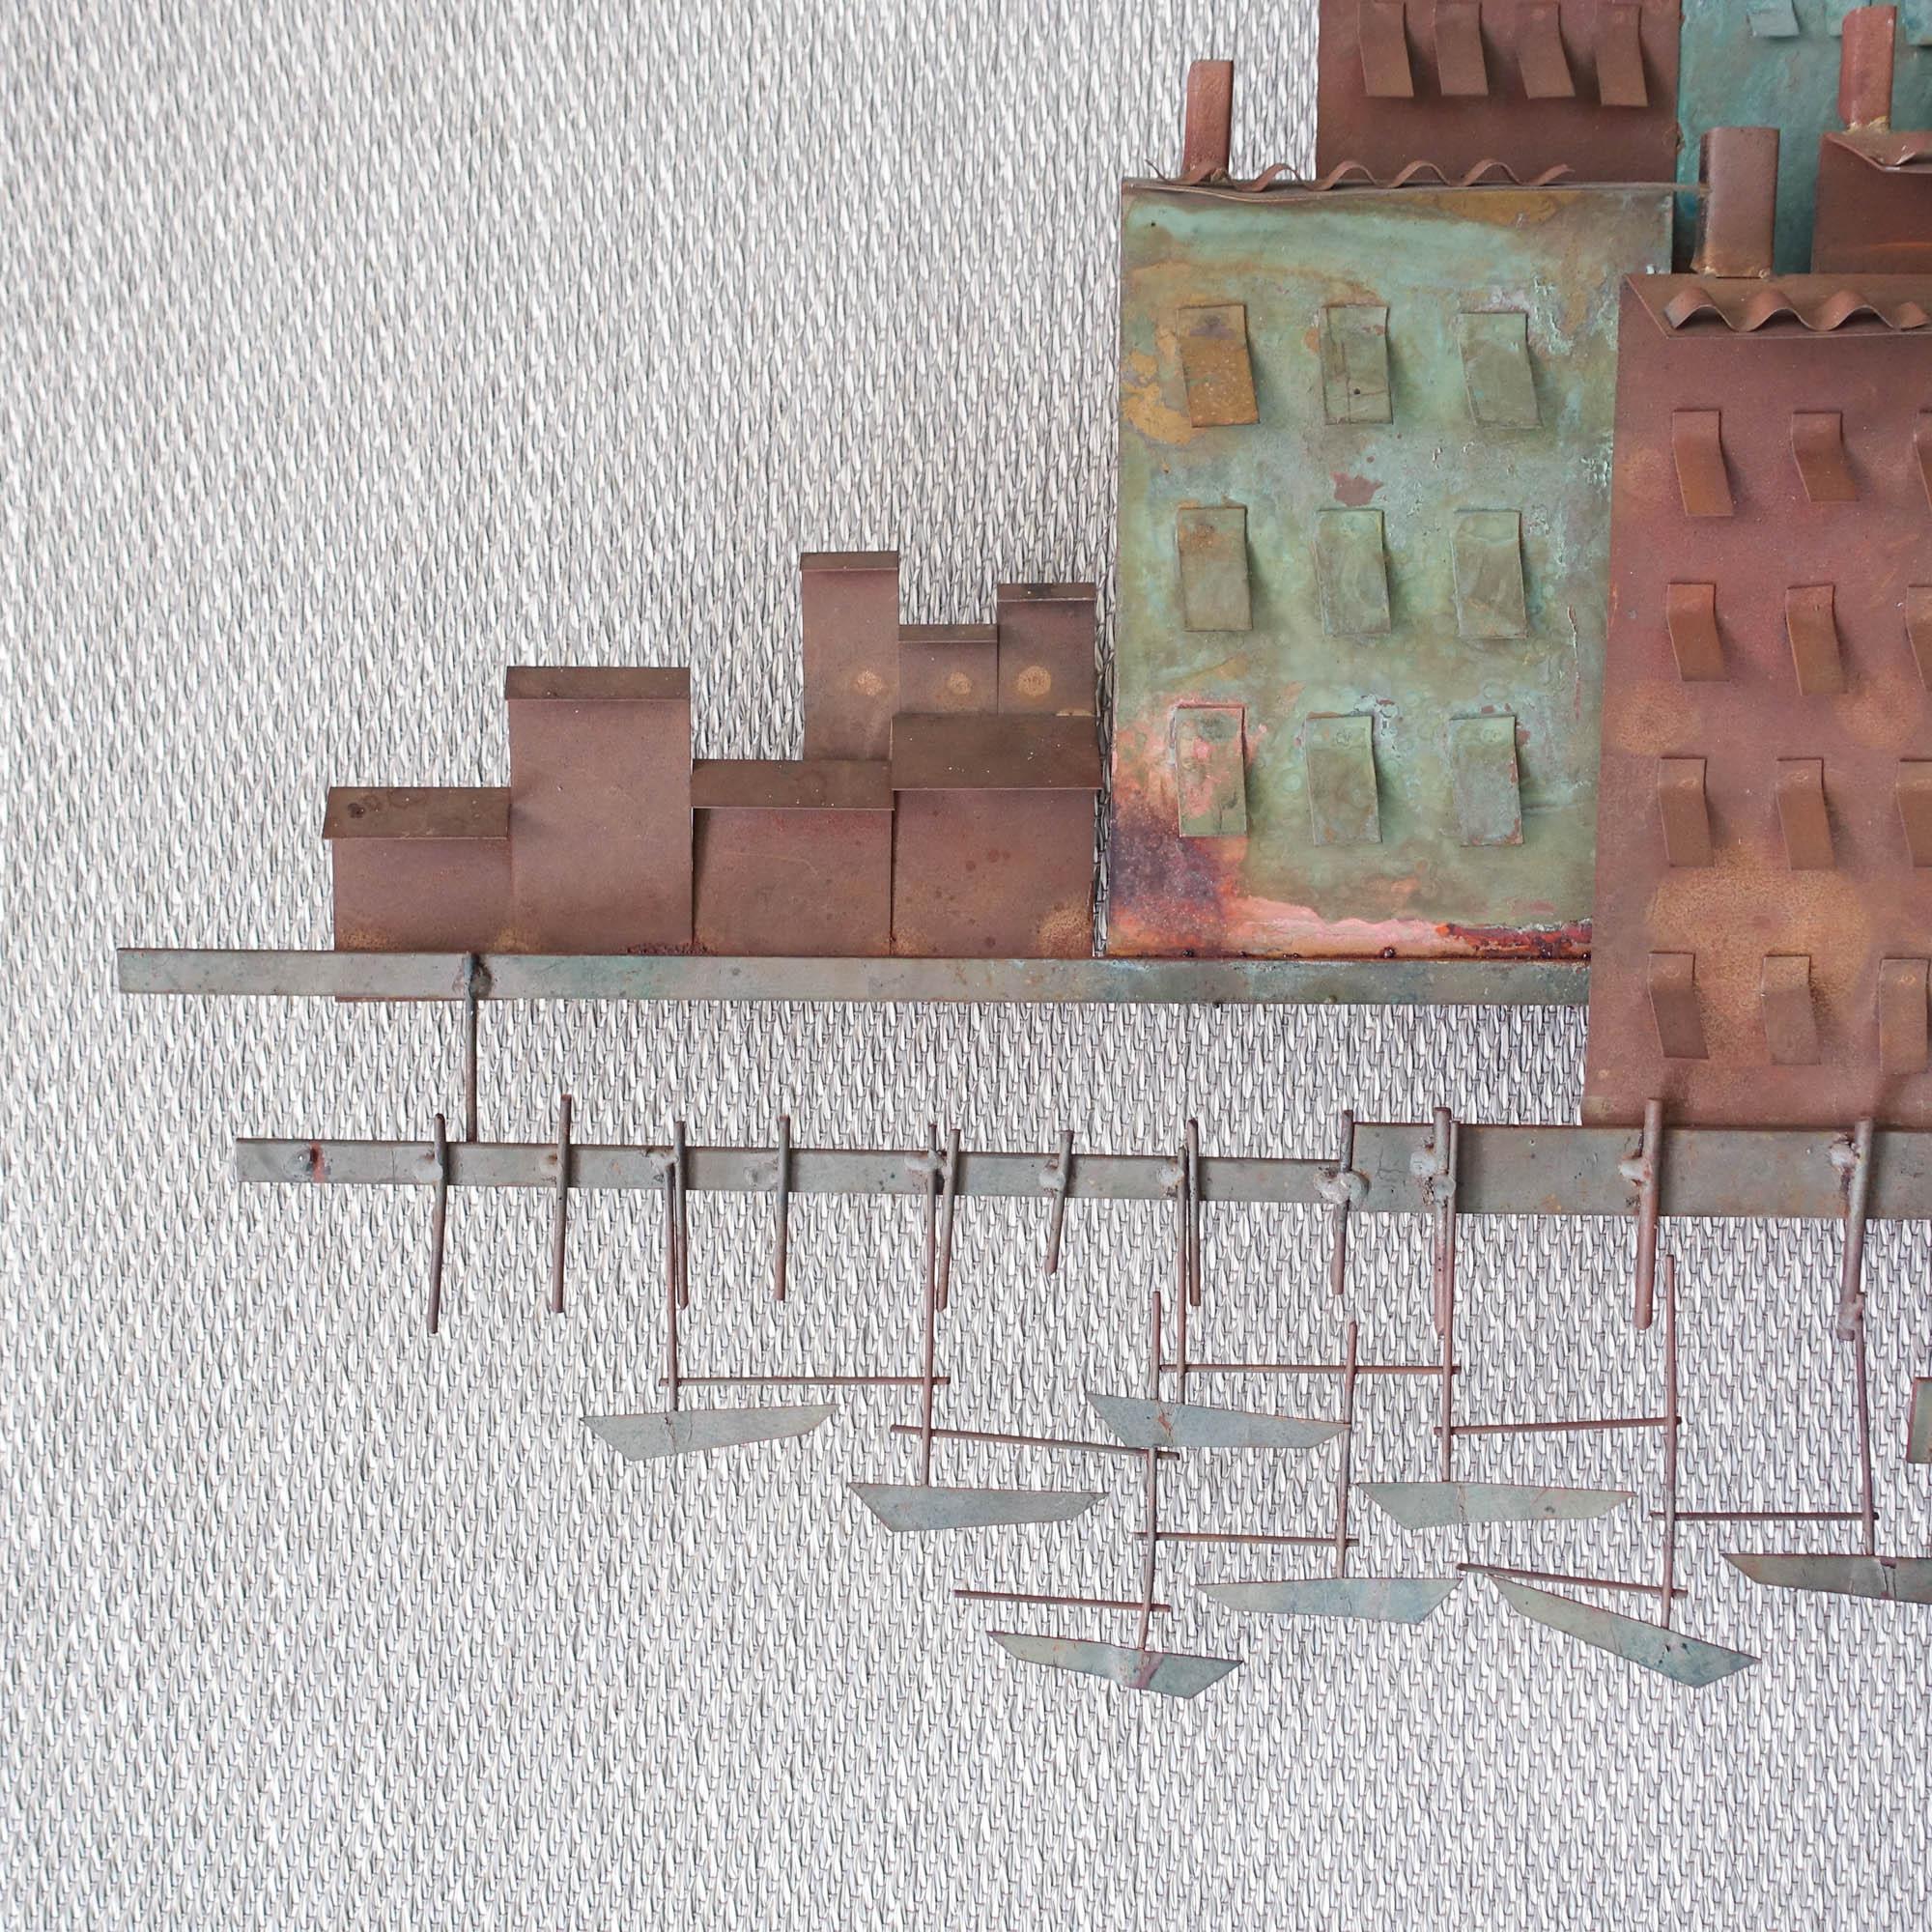 This wall sculpture was designed by Curtis Jere and produced for Artisan House, in USA, during the 1972s. It is made of brass, iron and copper and represents a village and it's port. Curtis Jeré was the shared pseudonym of two artists, Curtis